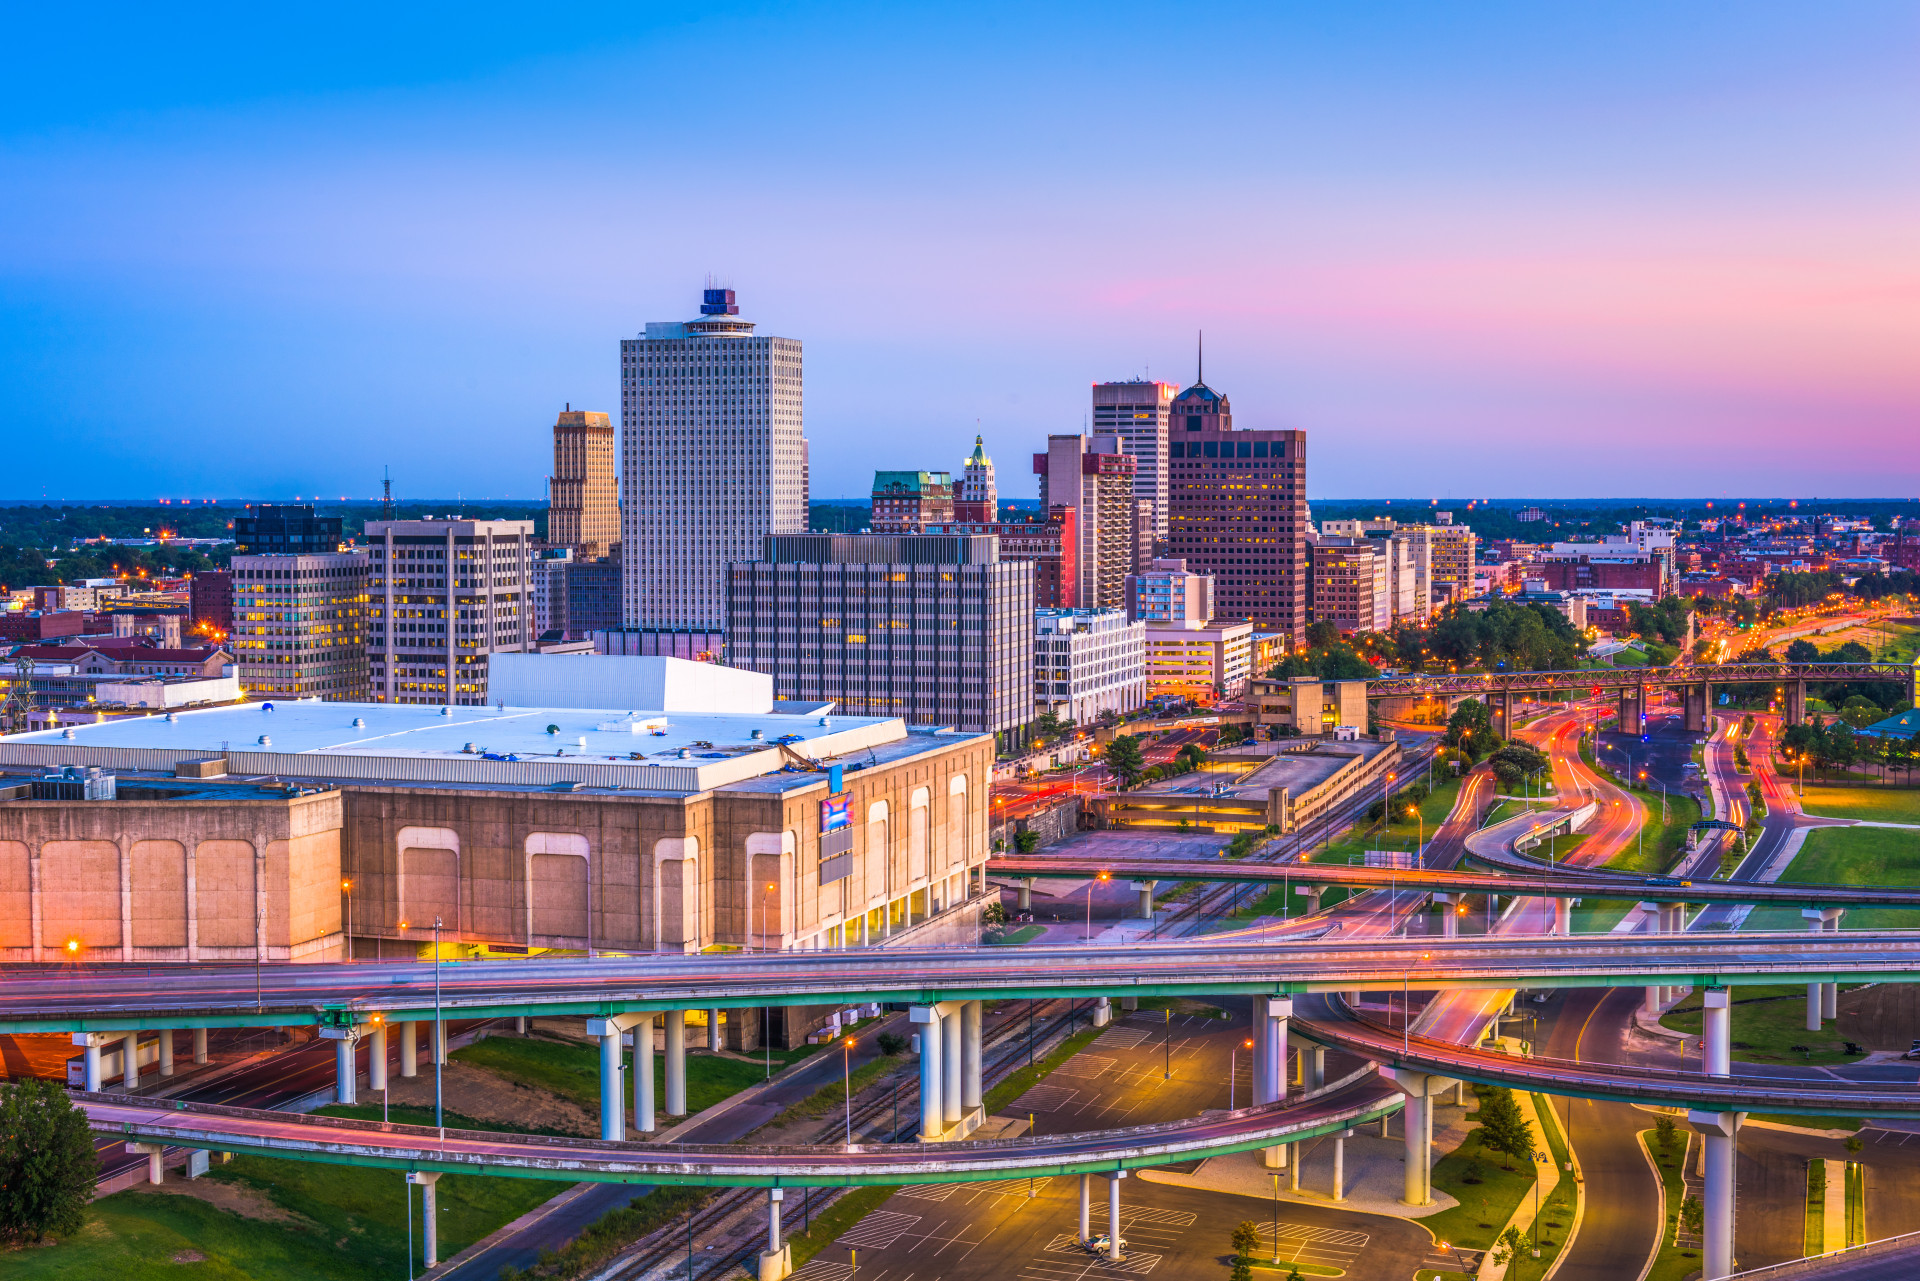 Now, if you're looking for a big city with a buzzing nightlife, then Memphis in Tennessee is your best option!<p>You may also like:<a href="https://www.starsinsider.com/n/288574?utm_source=msn.com&utm_medium=display&utm_campaign=referral_description&utm_content=210974v3en-ae"> Career lows: the worst films these actors ever made</a></p>